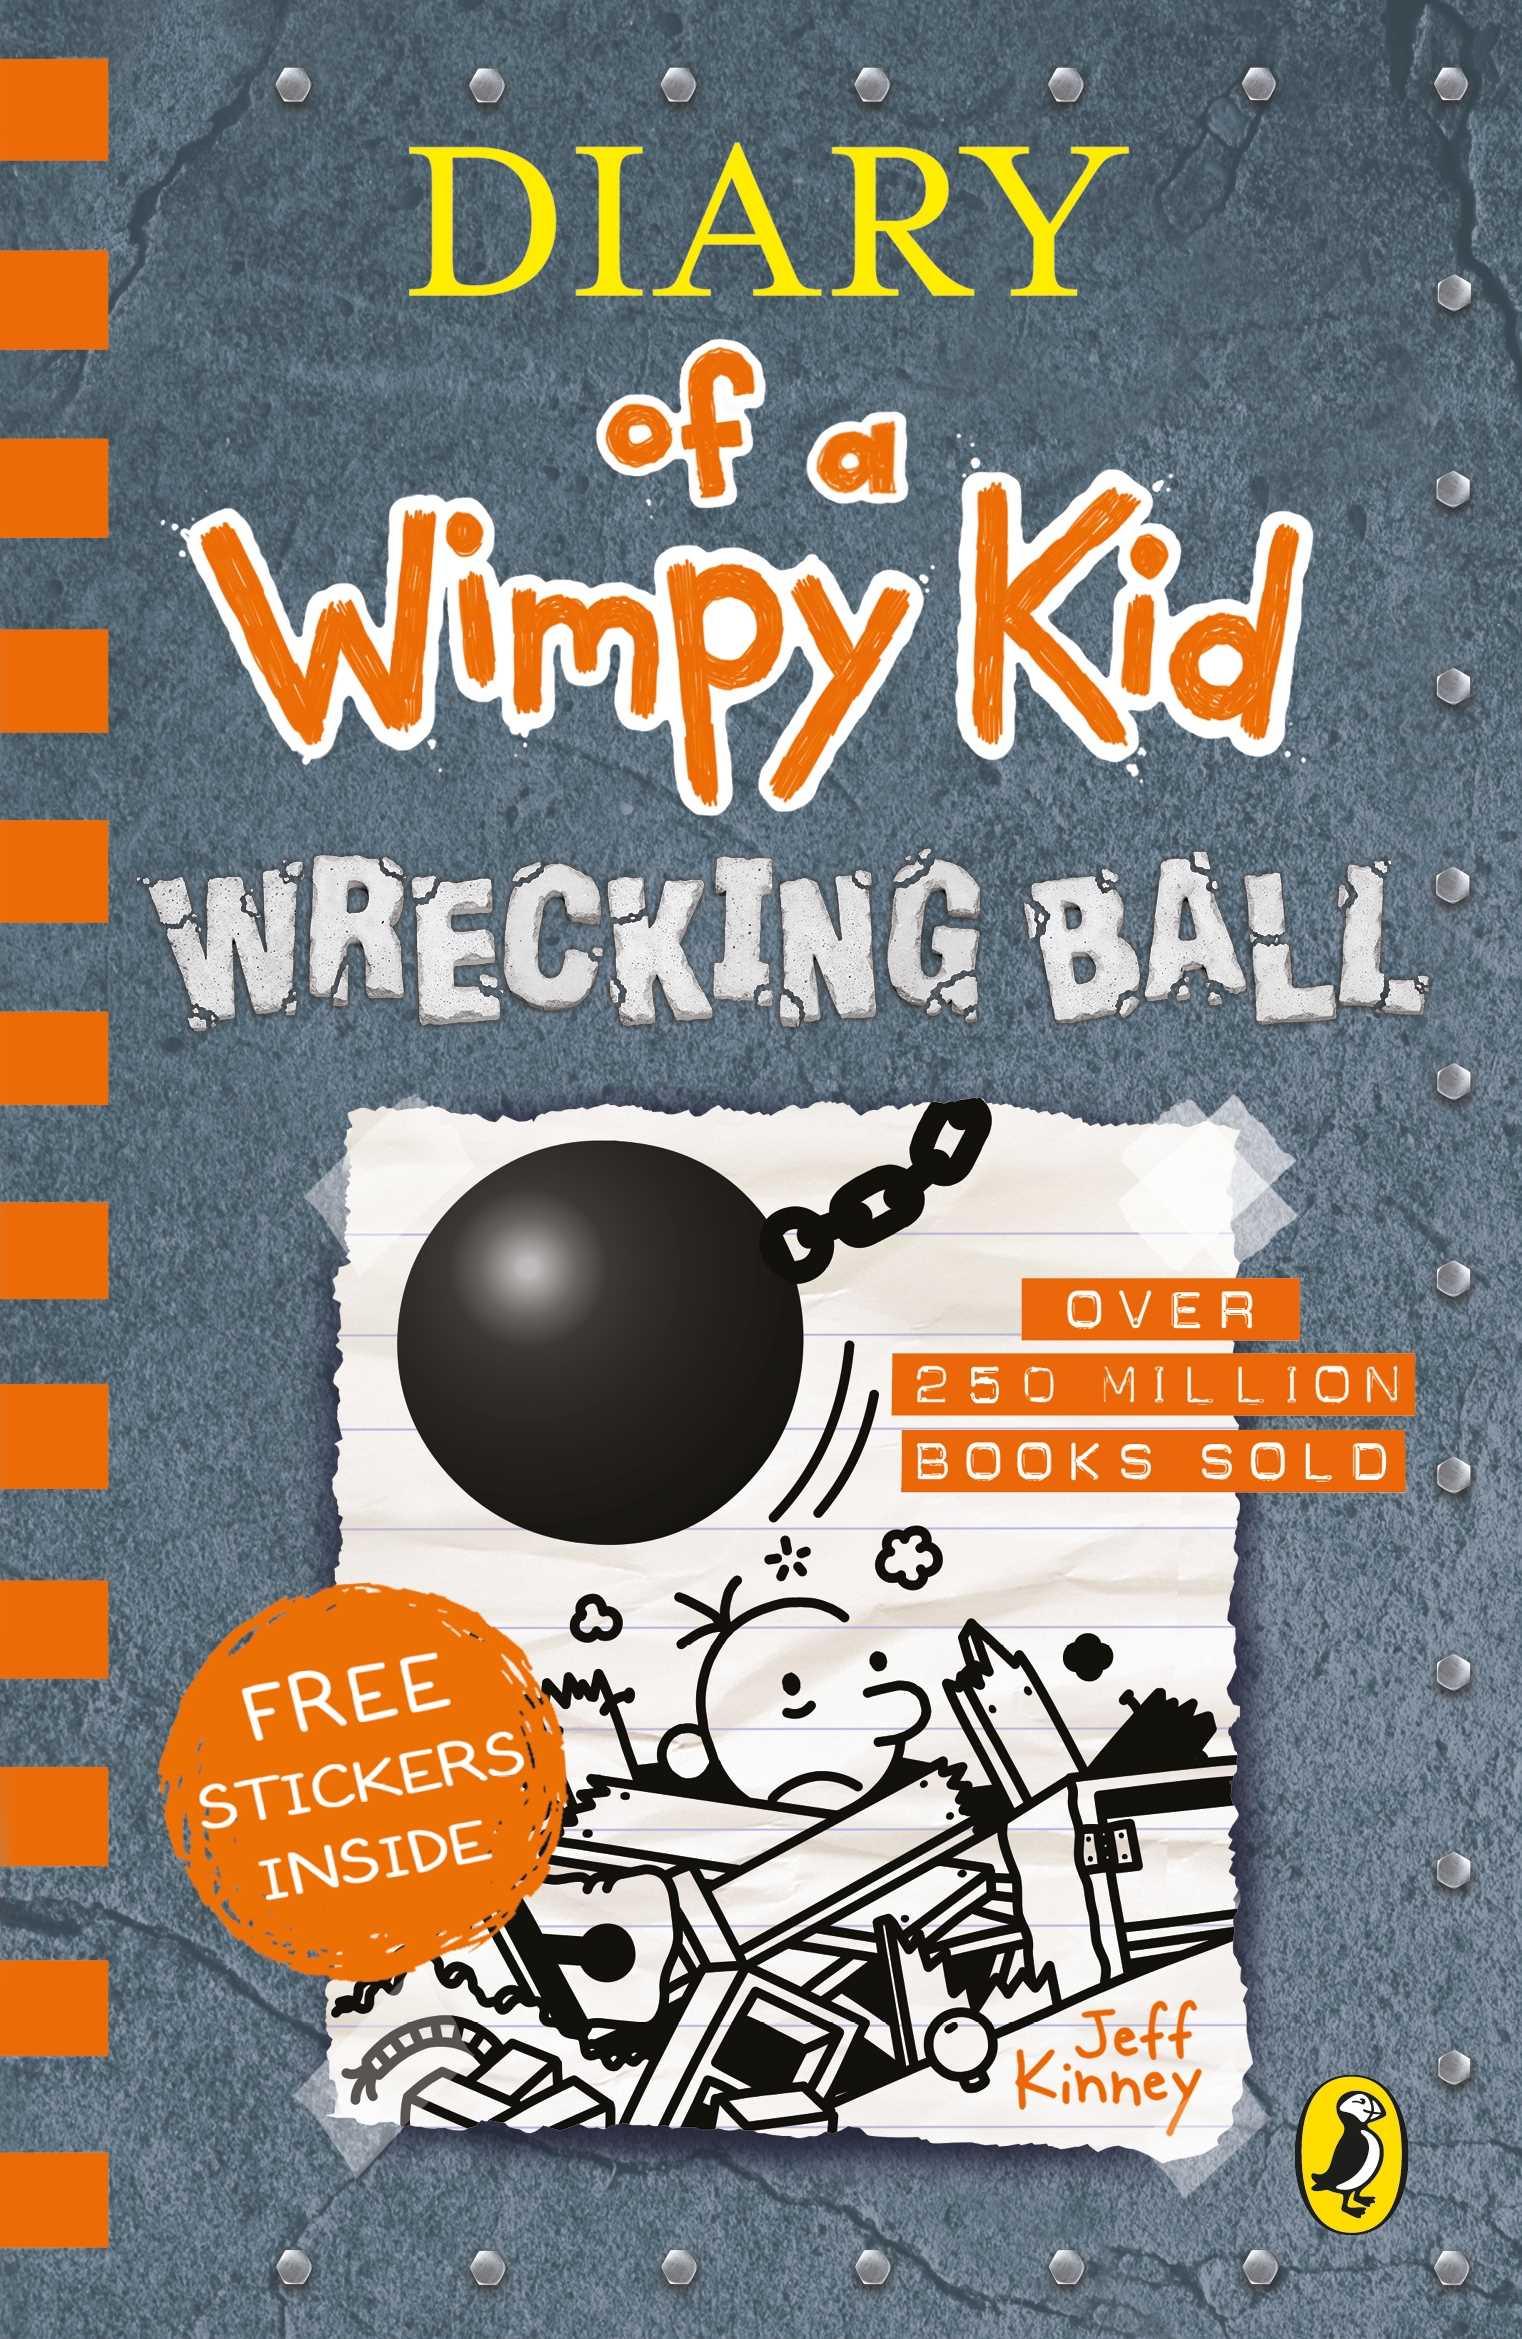 Diary of a Wimpy Kid #14 - WRECKING BALL - Spectrawide Bookstore